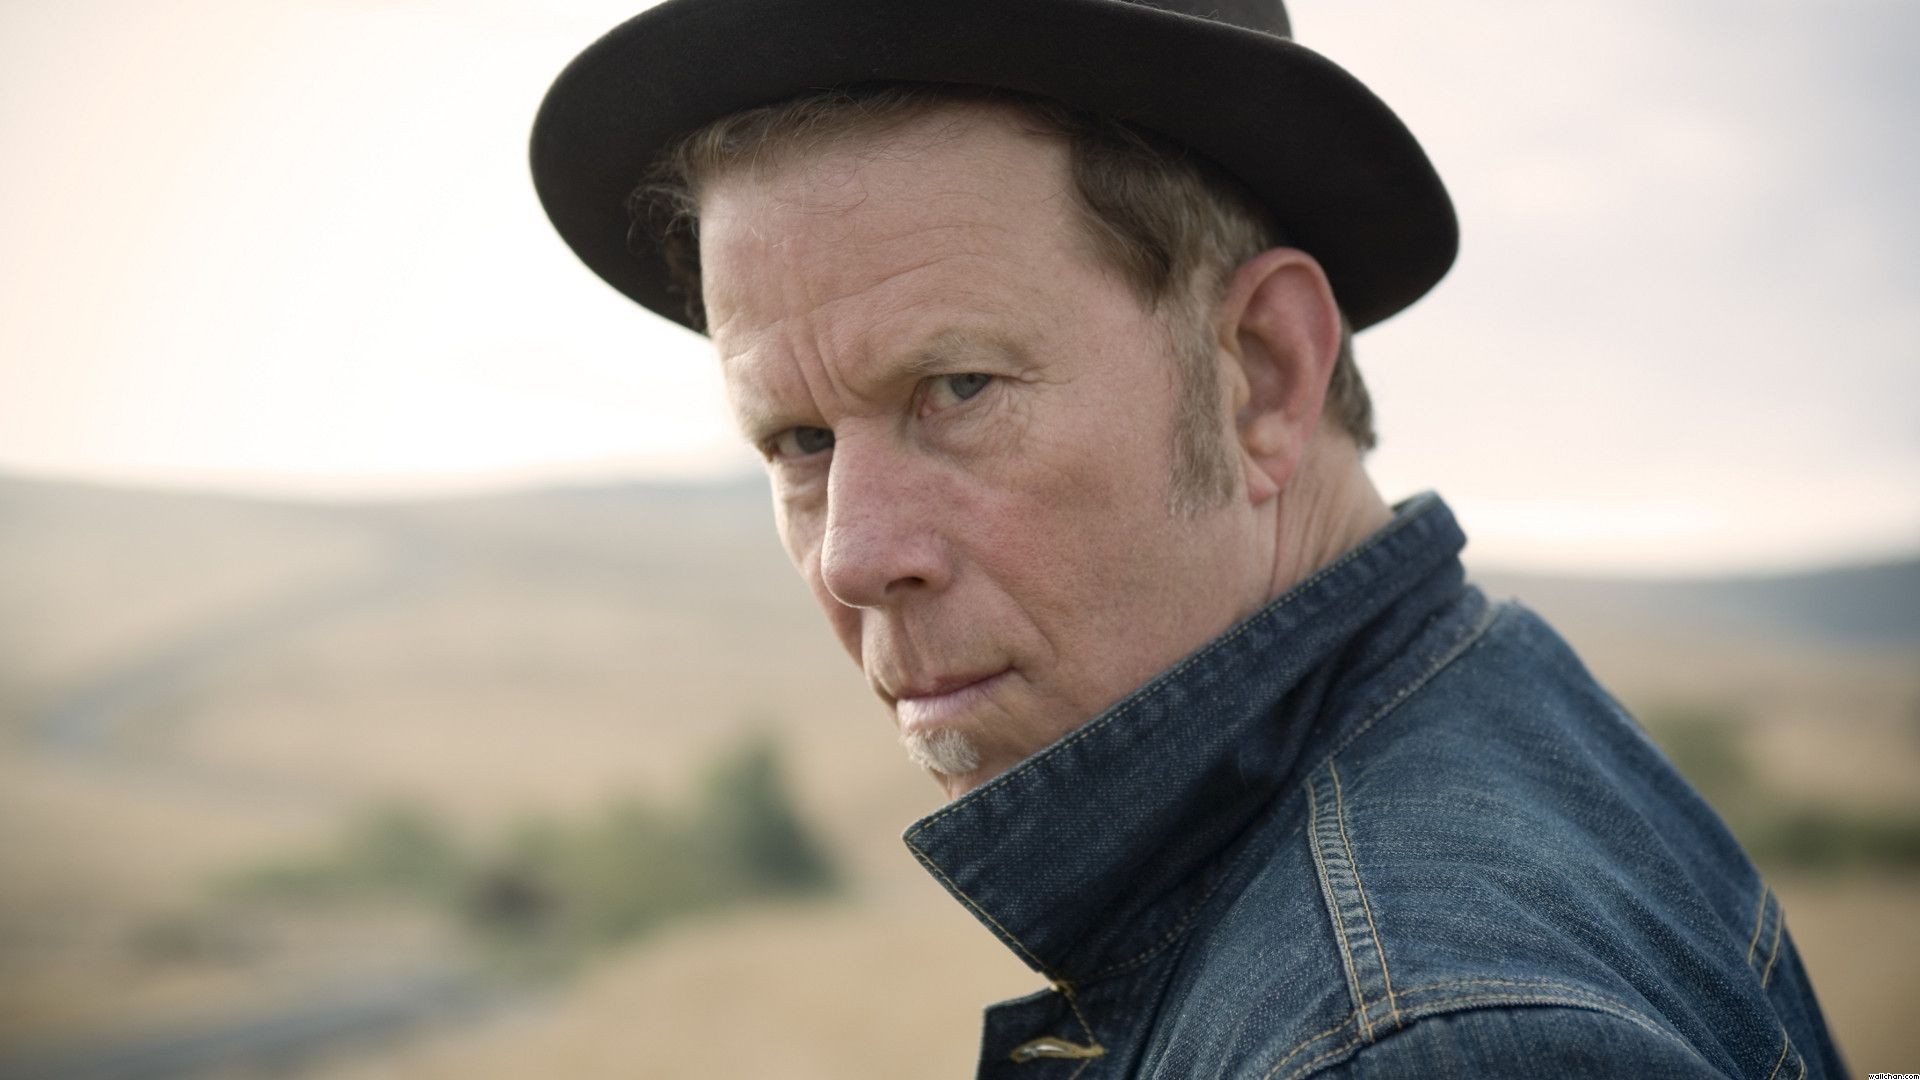 Tom Waits Musician Songwriters Actor Singer 1920x1080